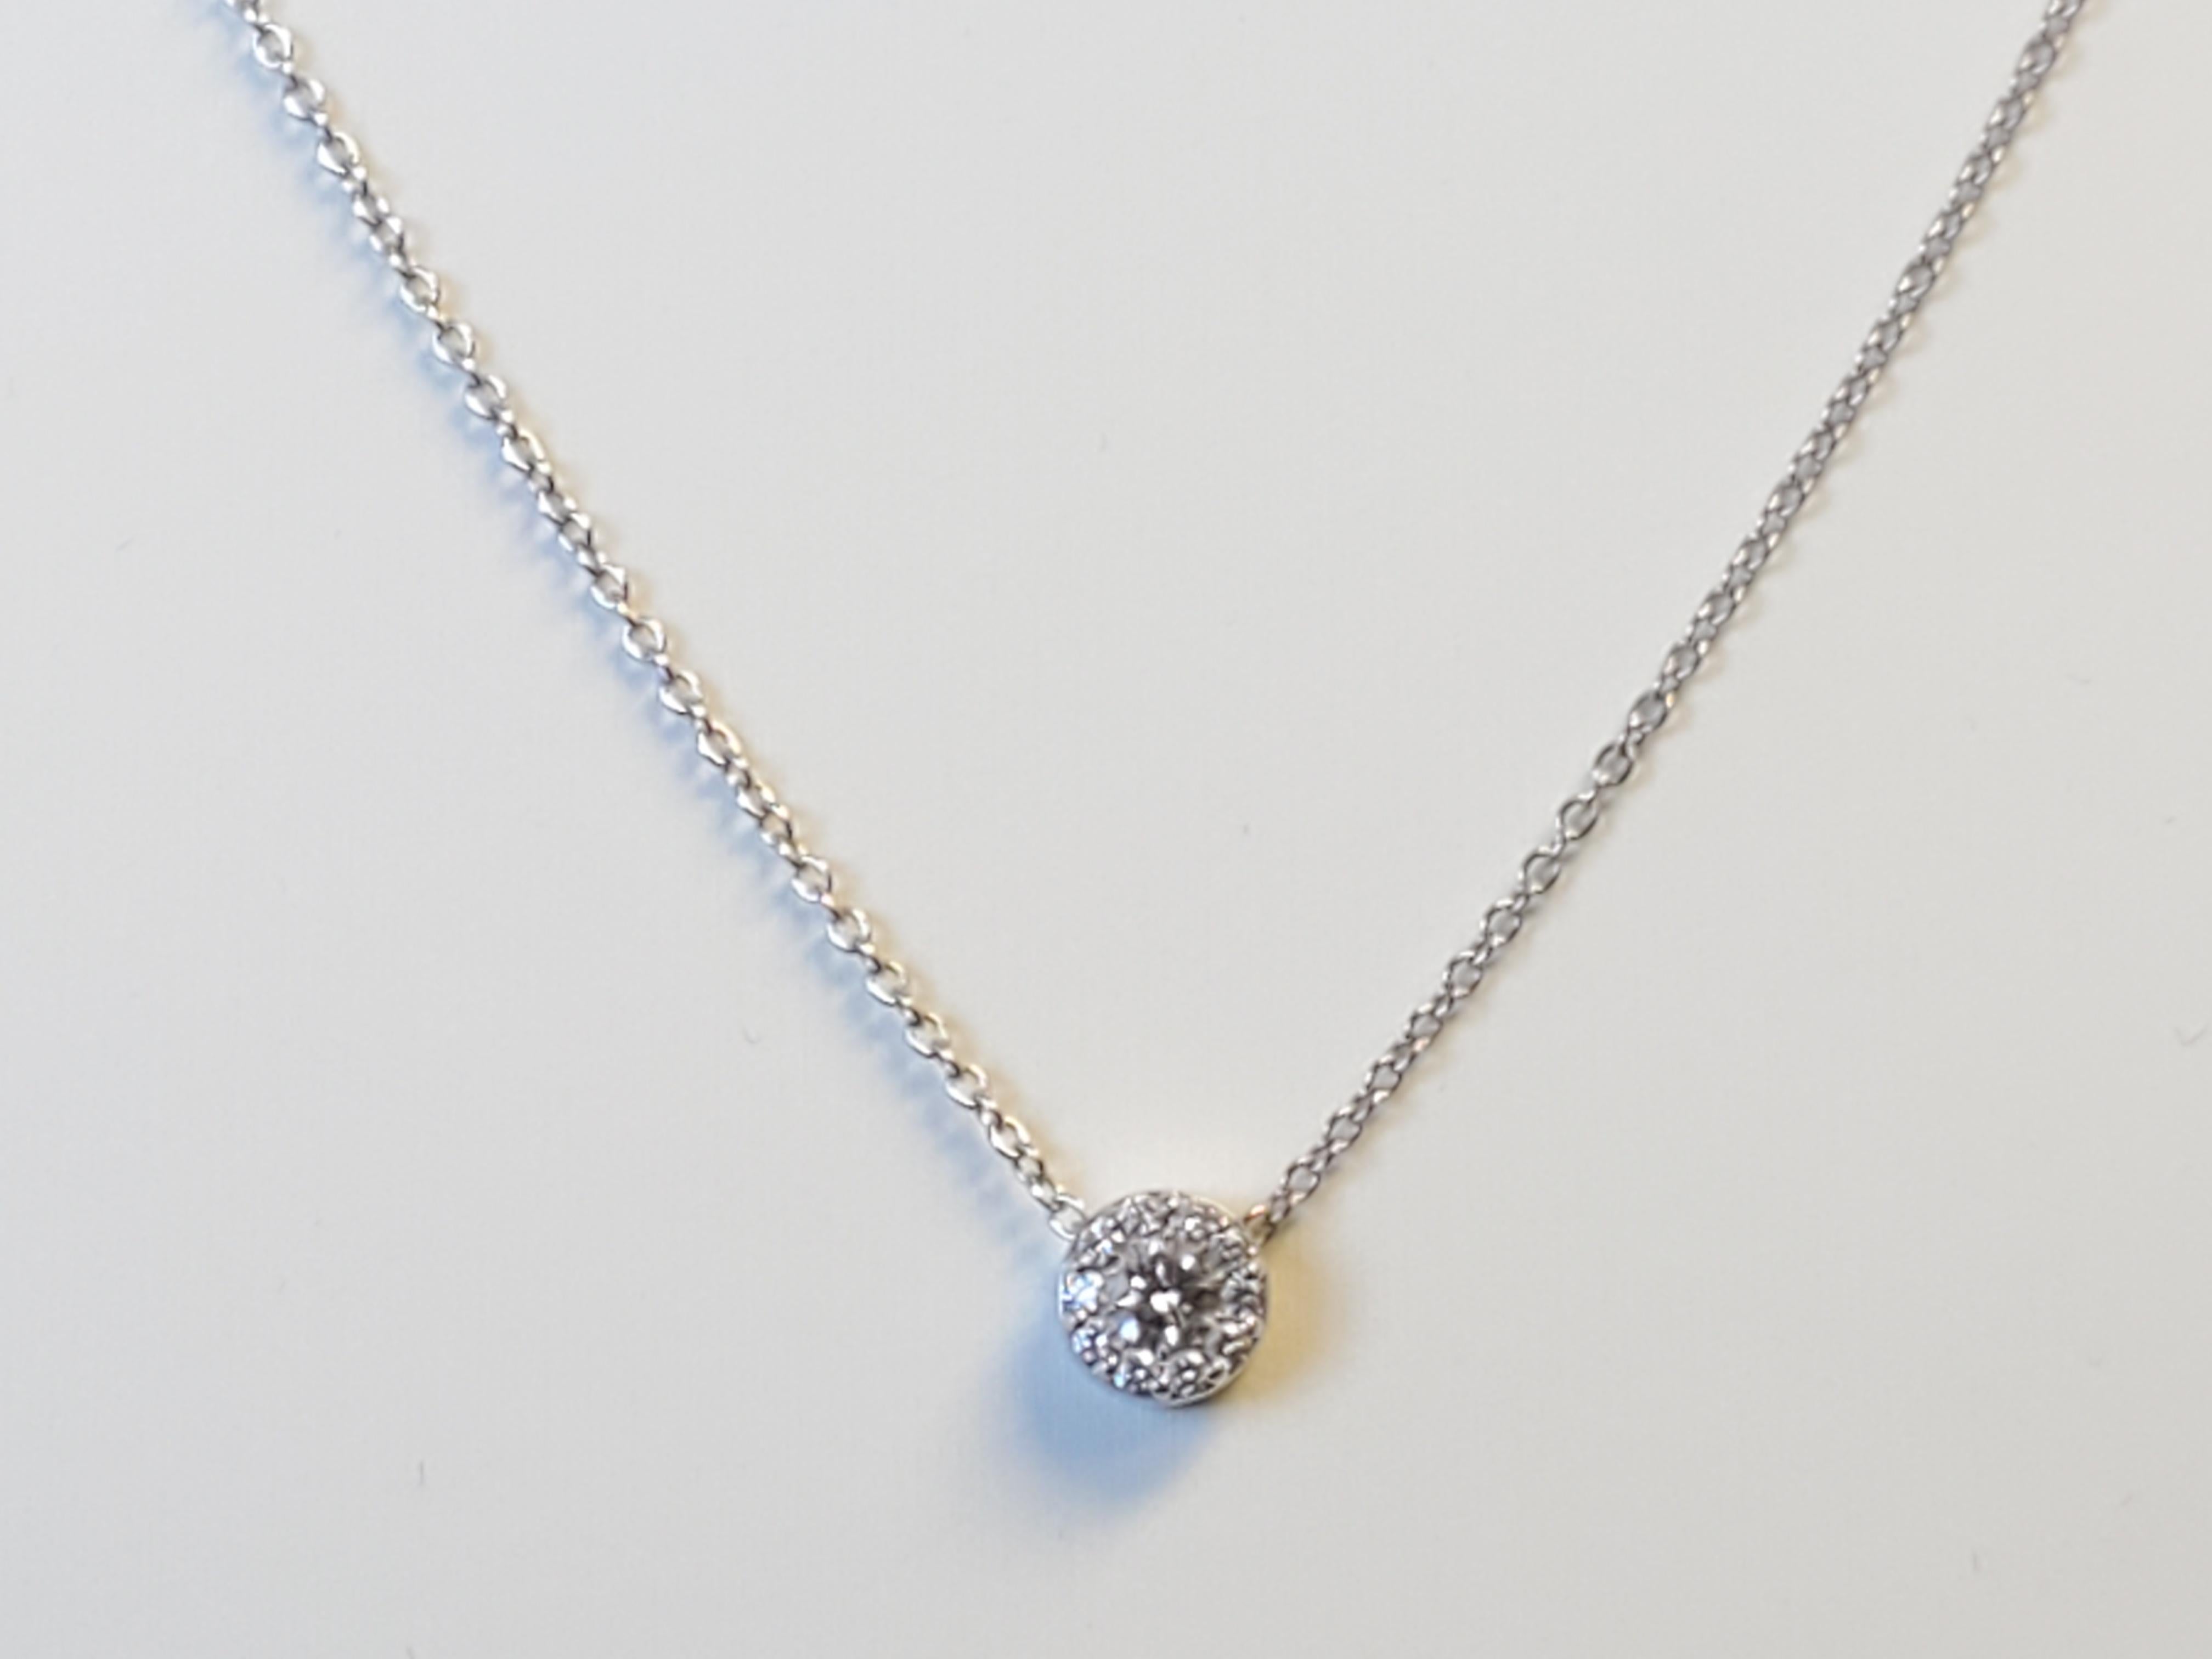 Listed is an estate 18k white gold Hearts on Fire diamond necklace. The tcw is approximately .25tcw nice clean I-J VS-SI1 diamonds. The pendant is stamped on the back as shown and the tag that connects to the clasp is stamped HOF. The necklace is in